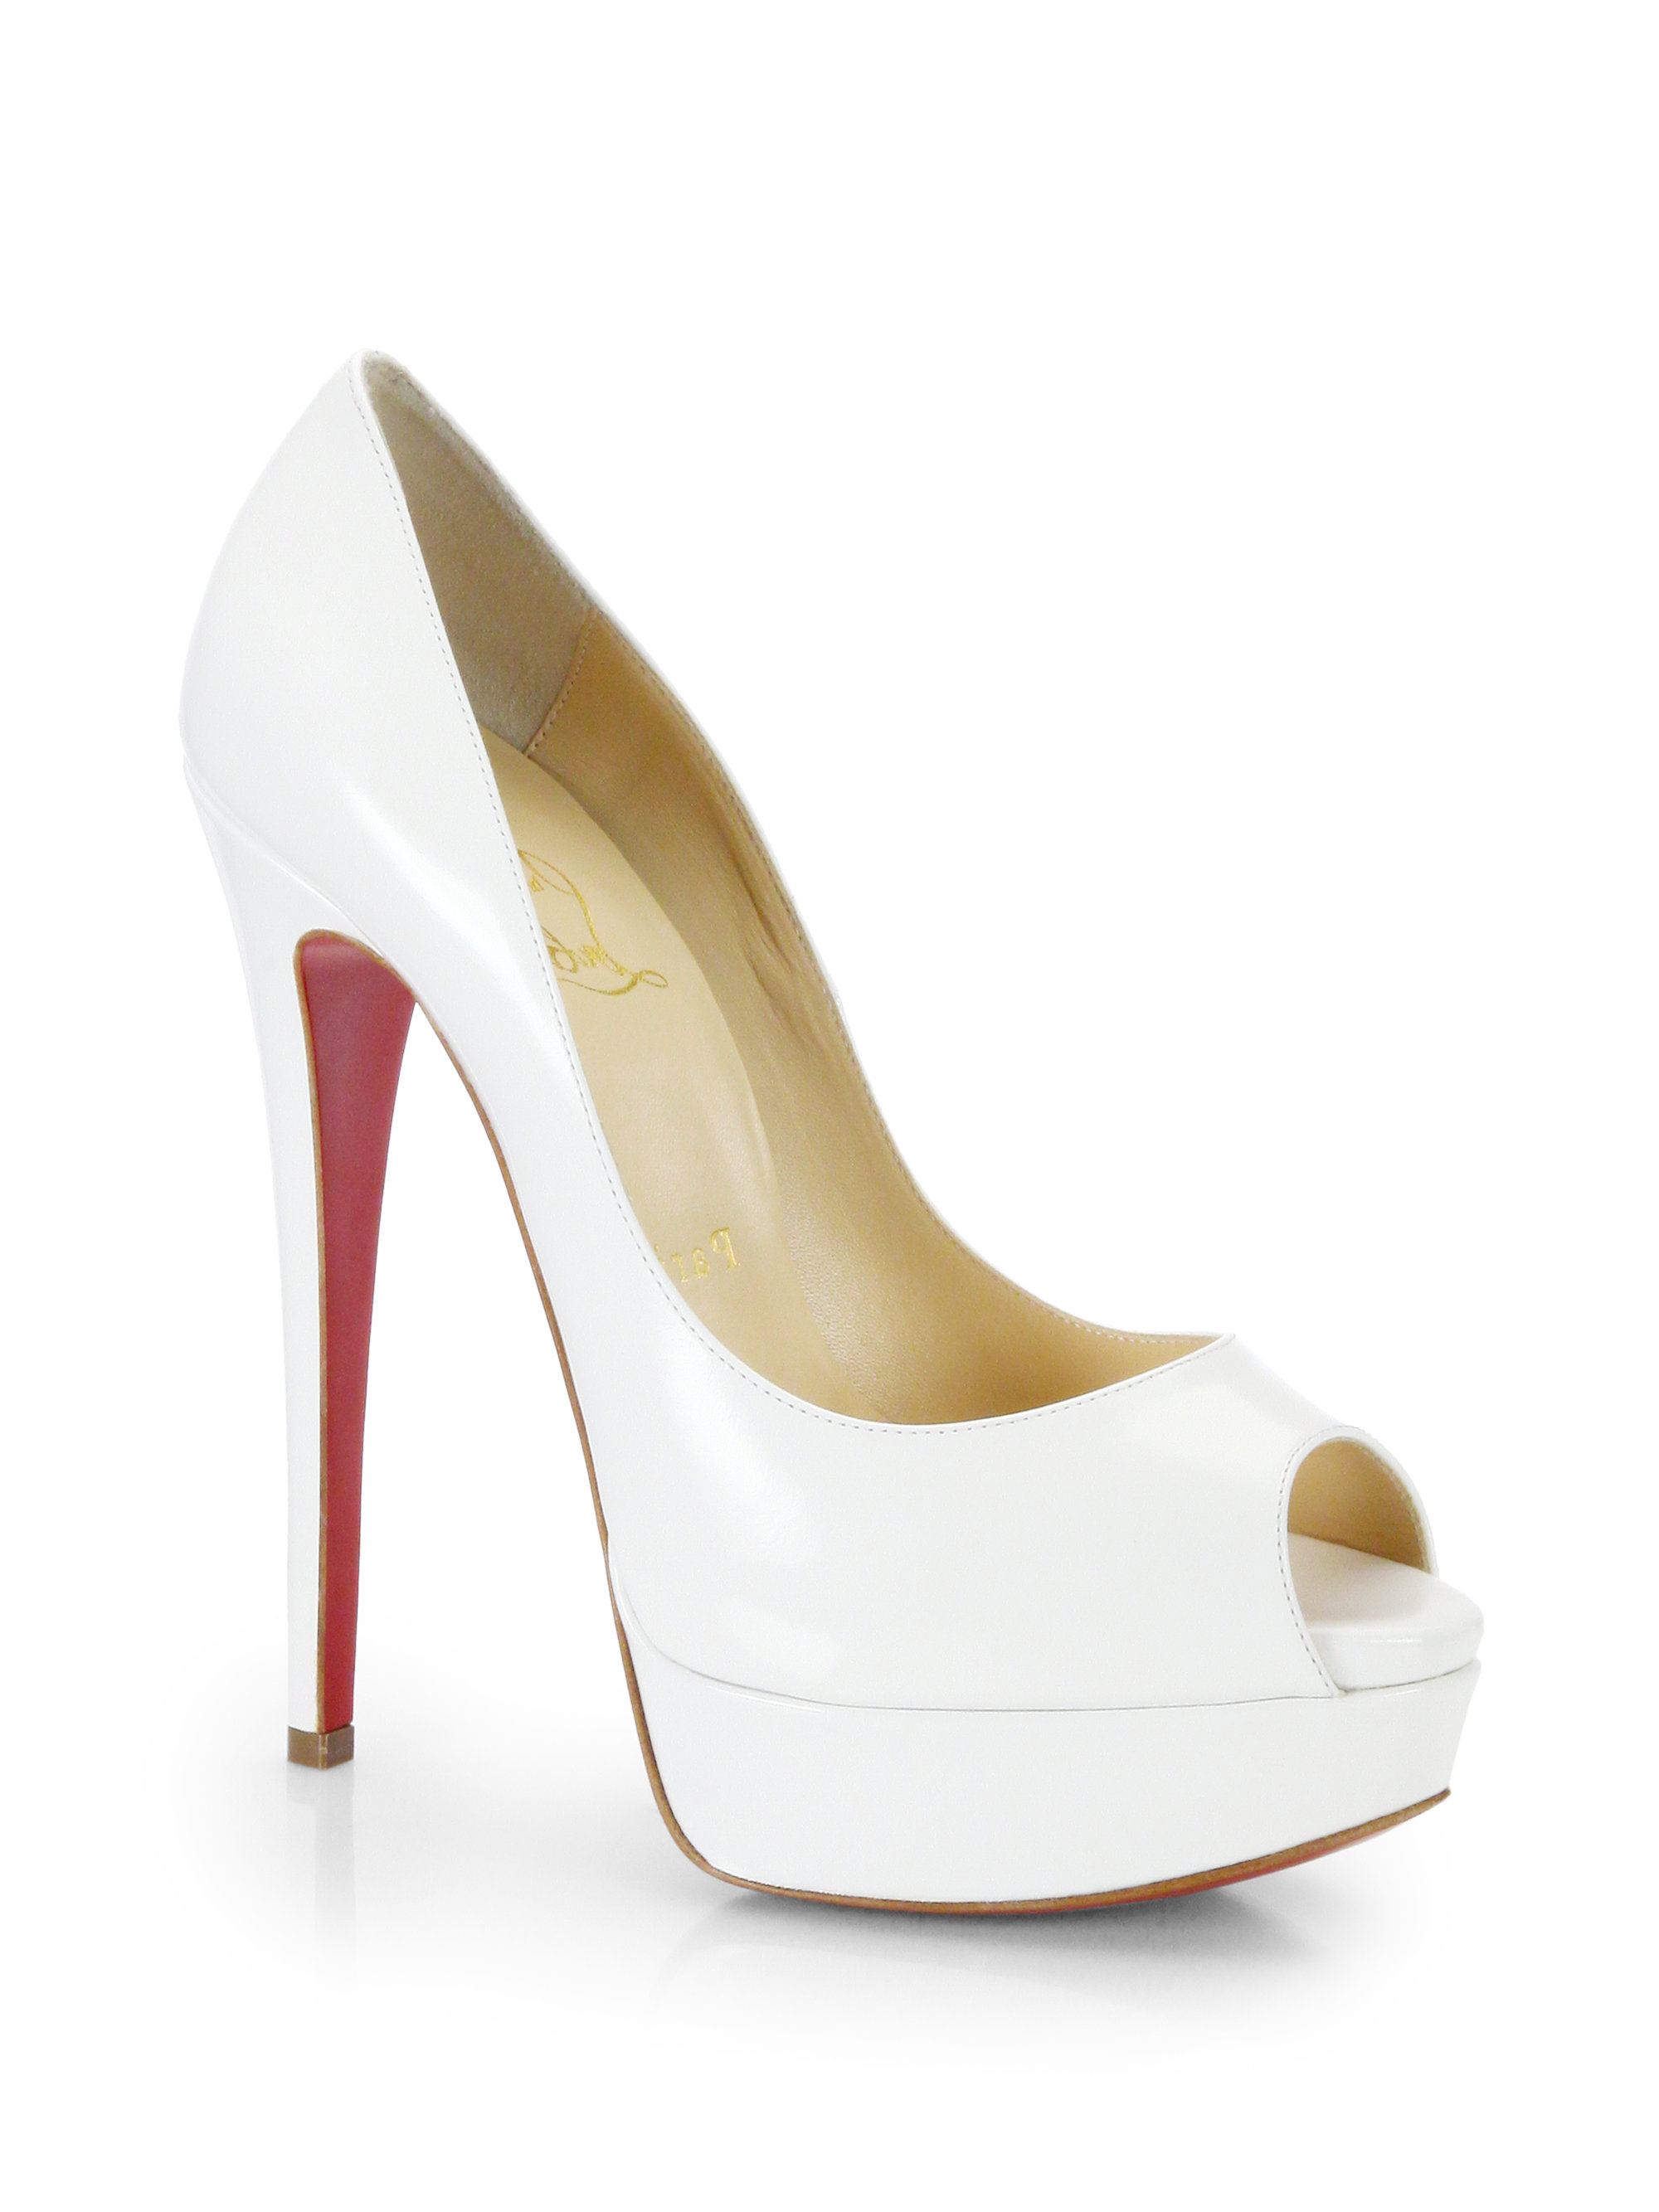 christian-louboutin-white-lady-peep-leather-pumps-product-2-606918933-normal.jpeg  